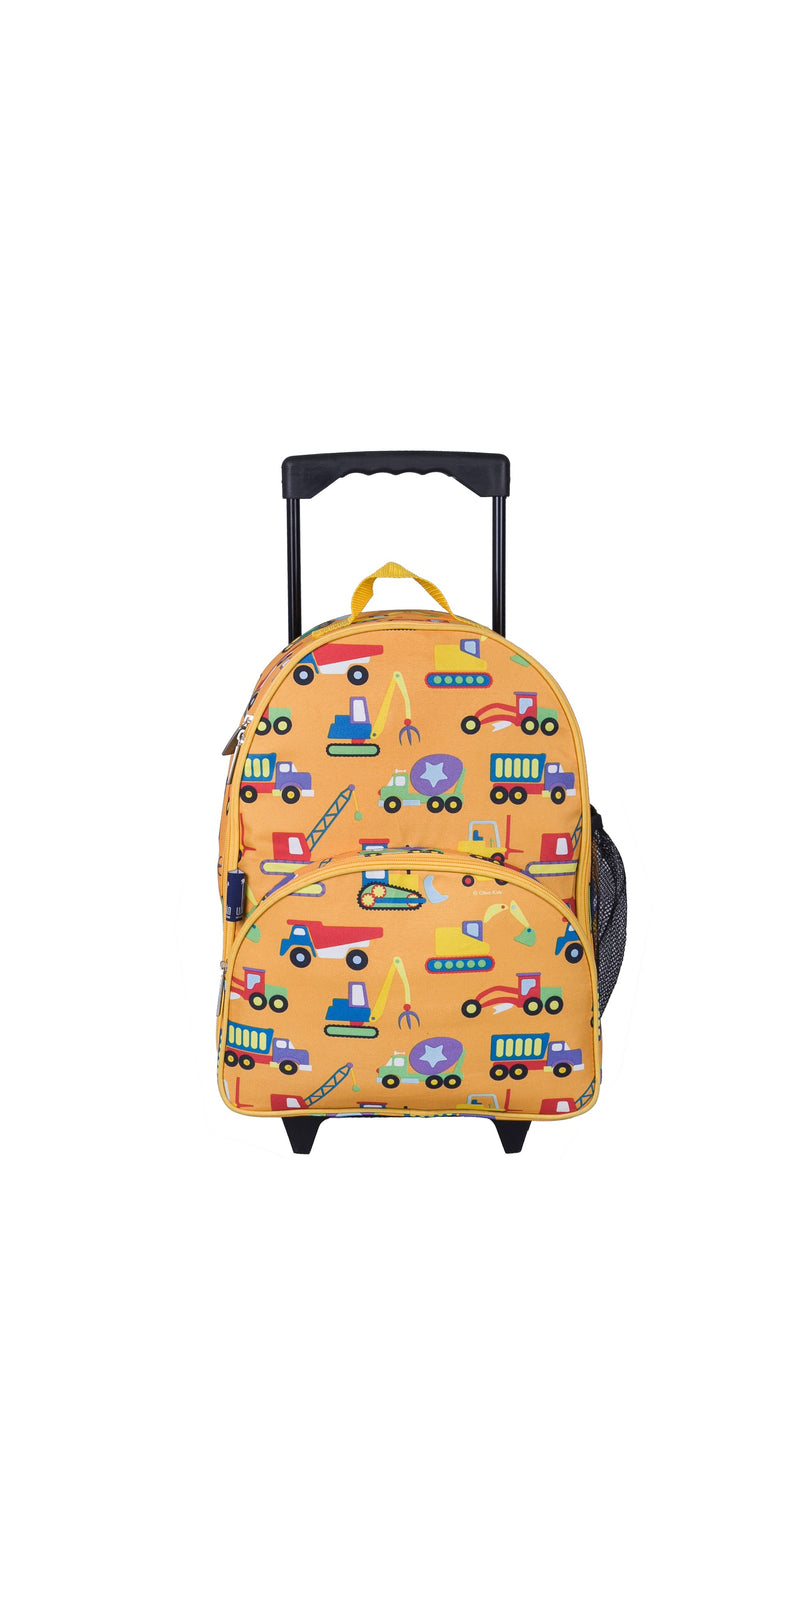 Wildkin Kids Rolling Luggage Under-seat Carry-on 16" - Strong Suitcases-Vegan Luggage